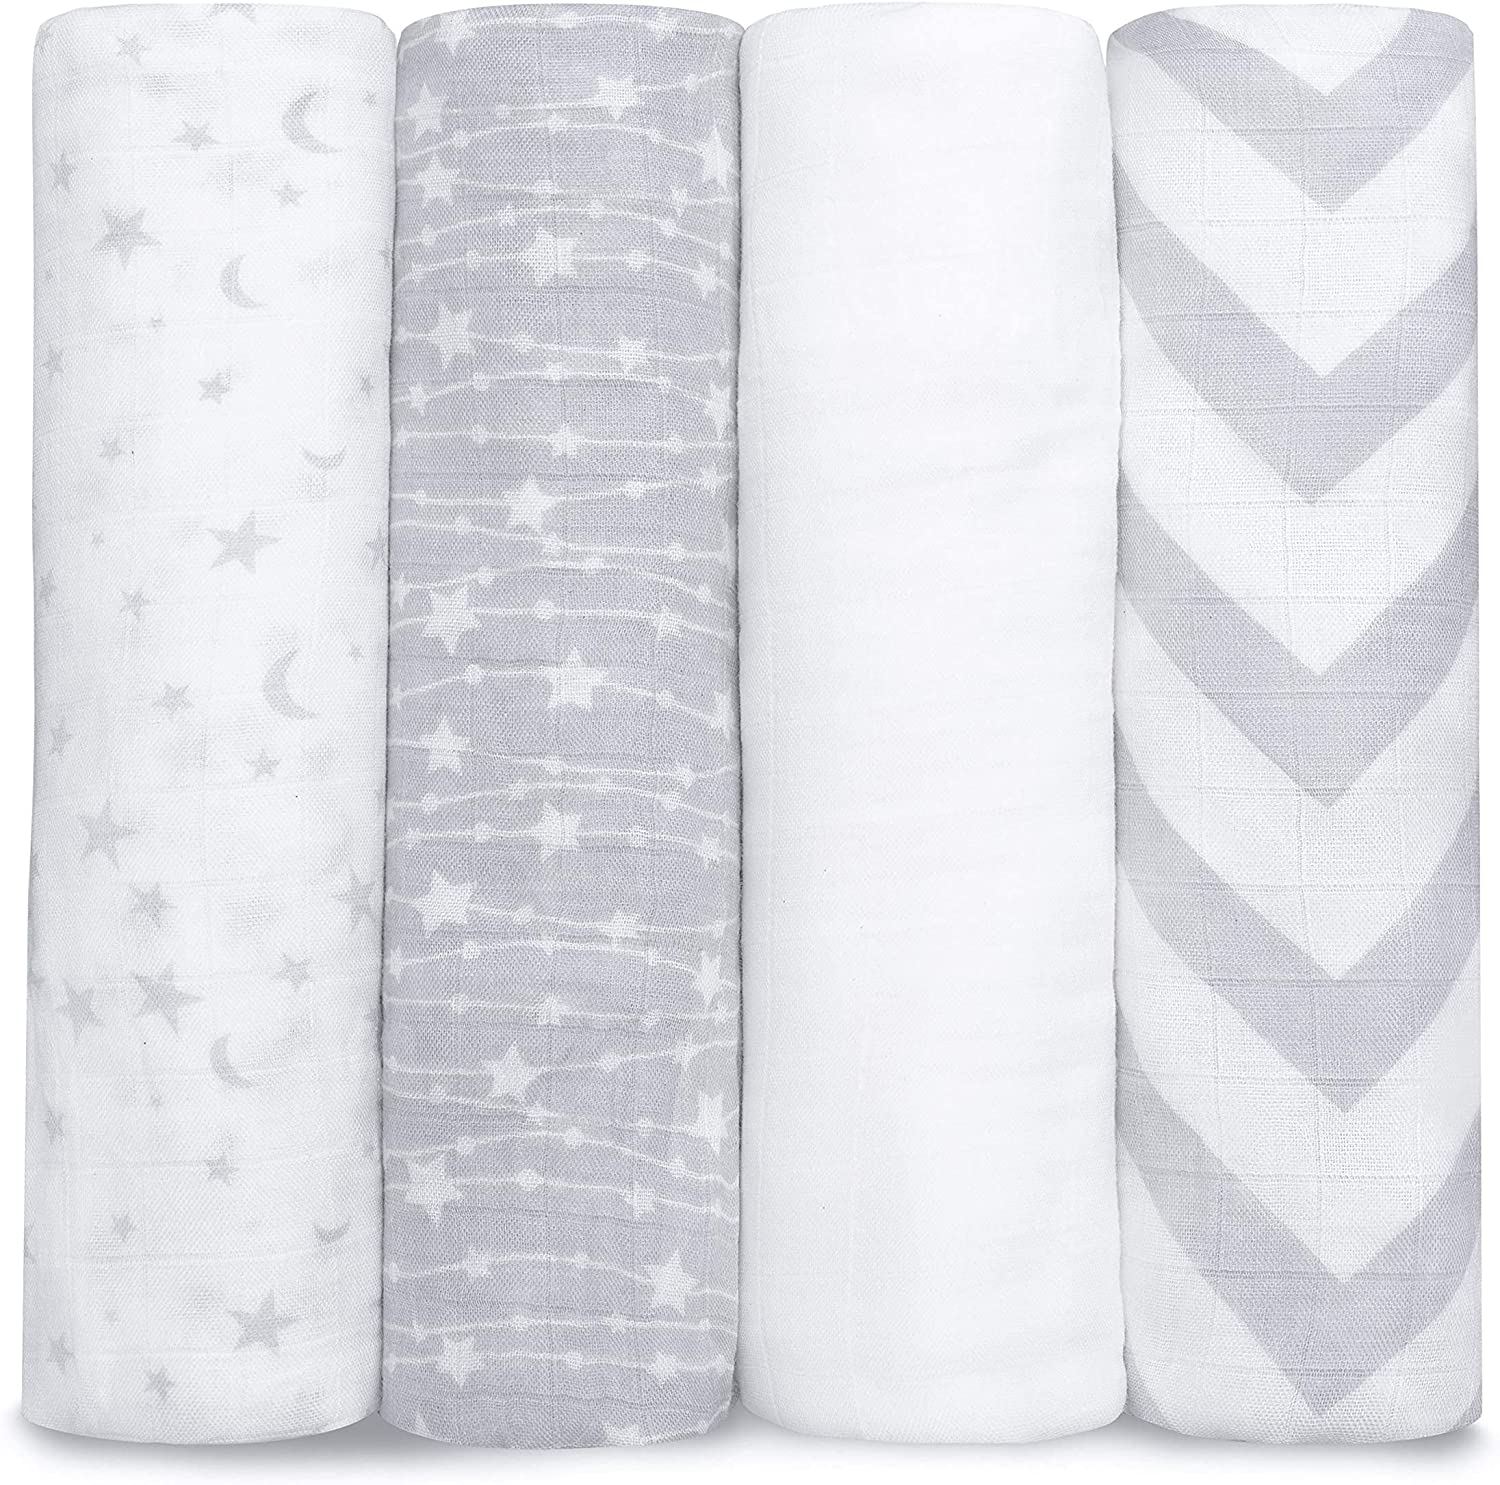 Muslin Swaddle Blankets Neutral Receiving Blanket for Boys and Girls by Comfy Cubs (Grey)